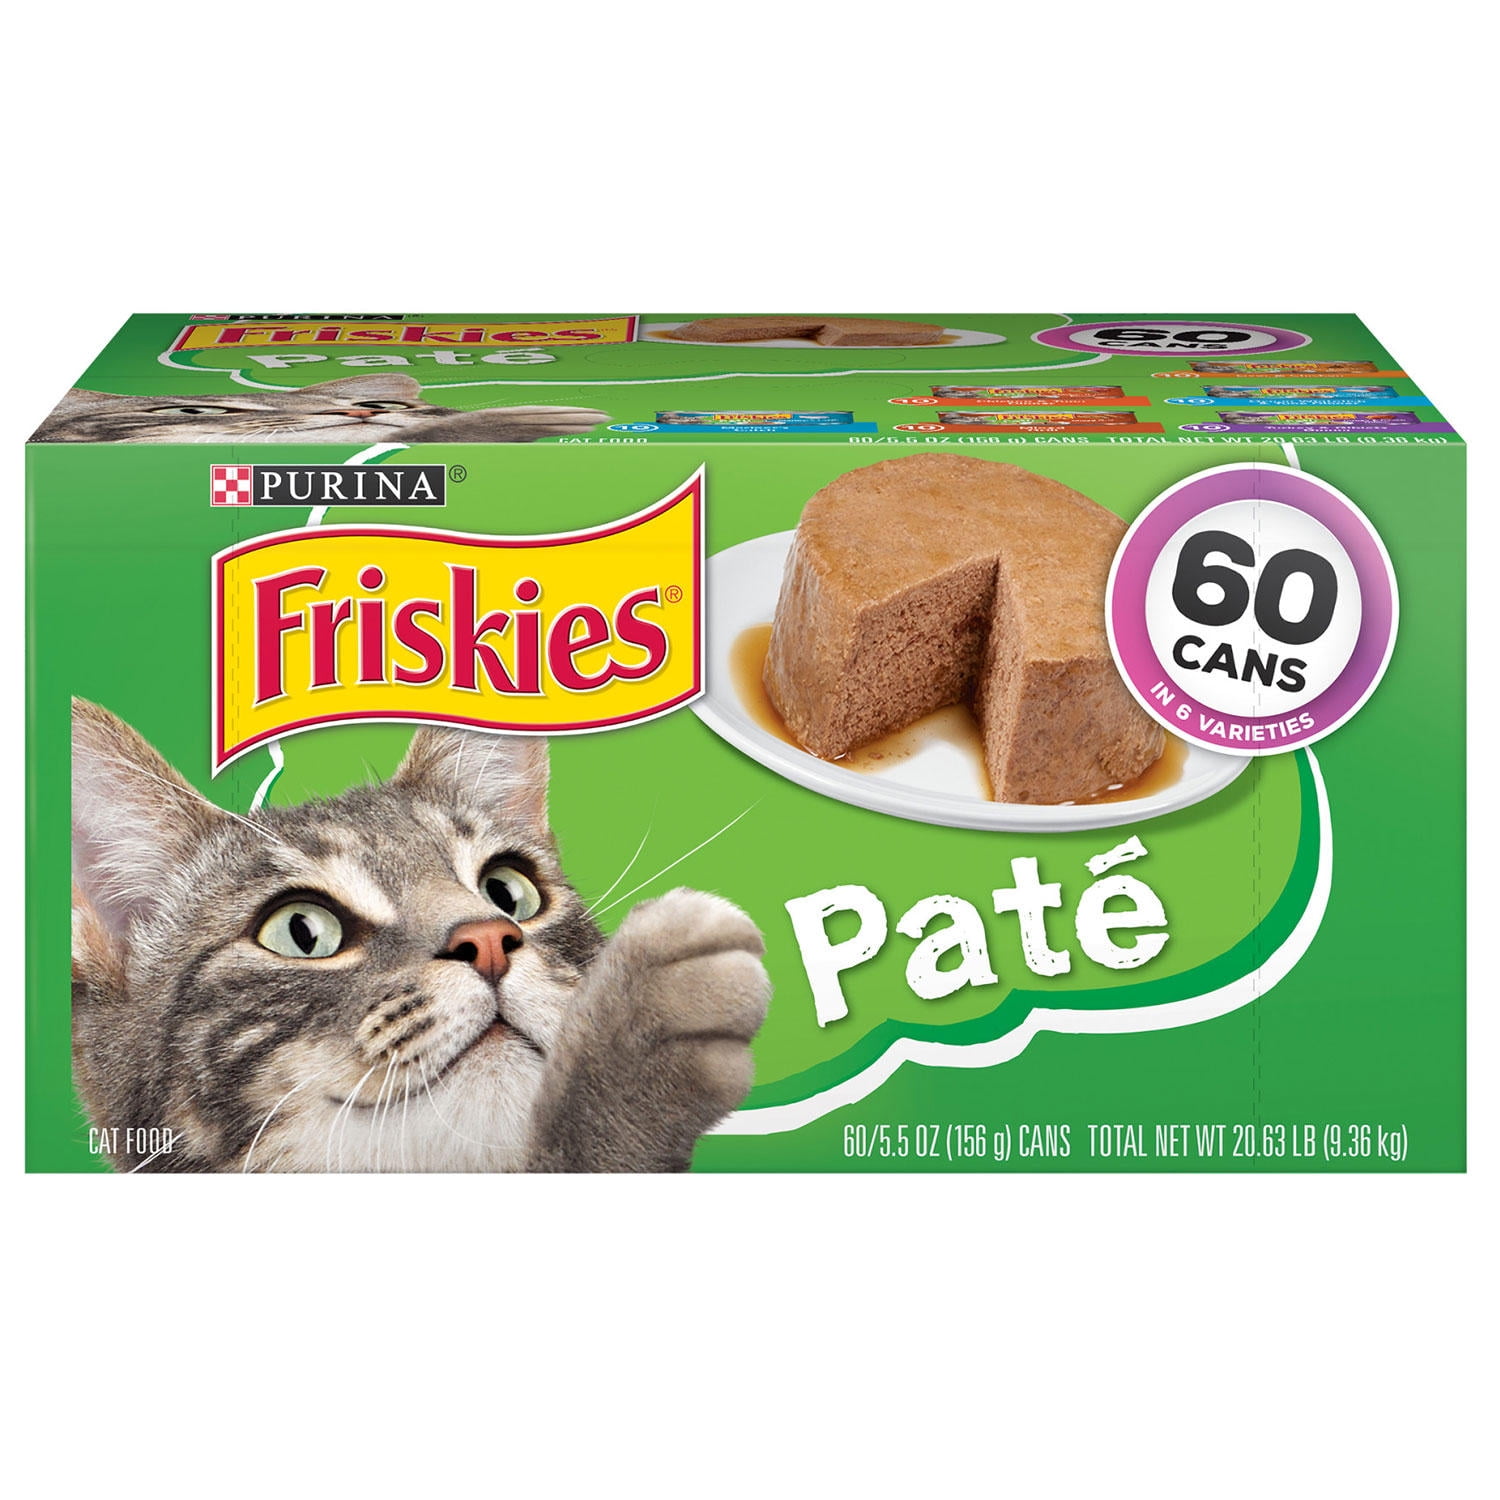 Purina Friskies Pate Wet Cat Food, Variety Pack,  Ounce (60 Count) -  